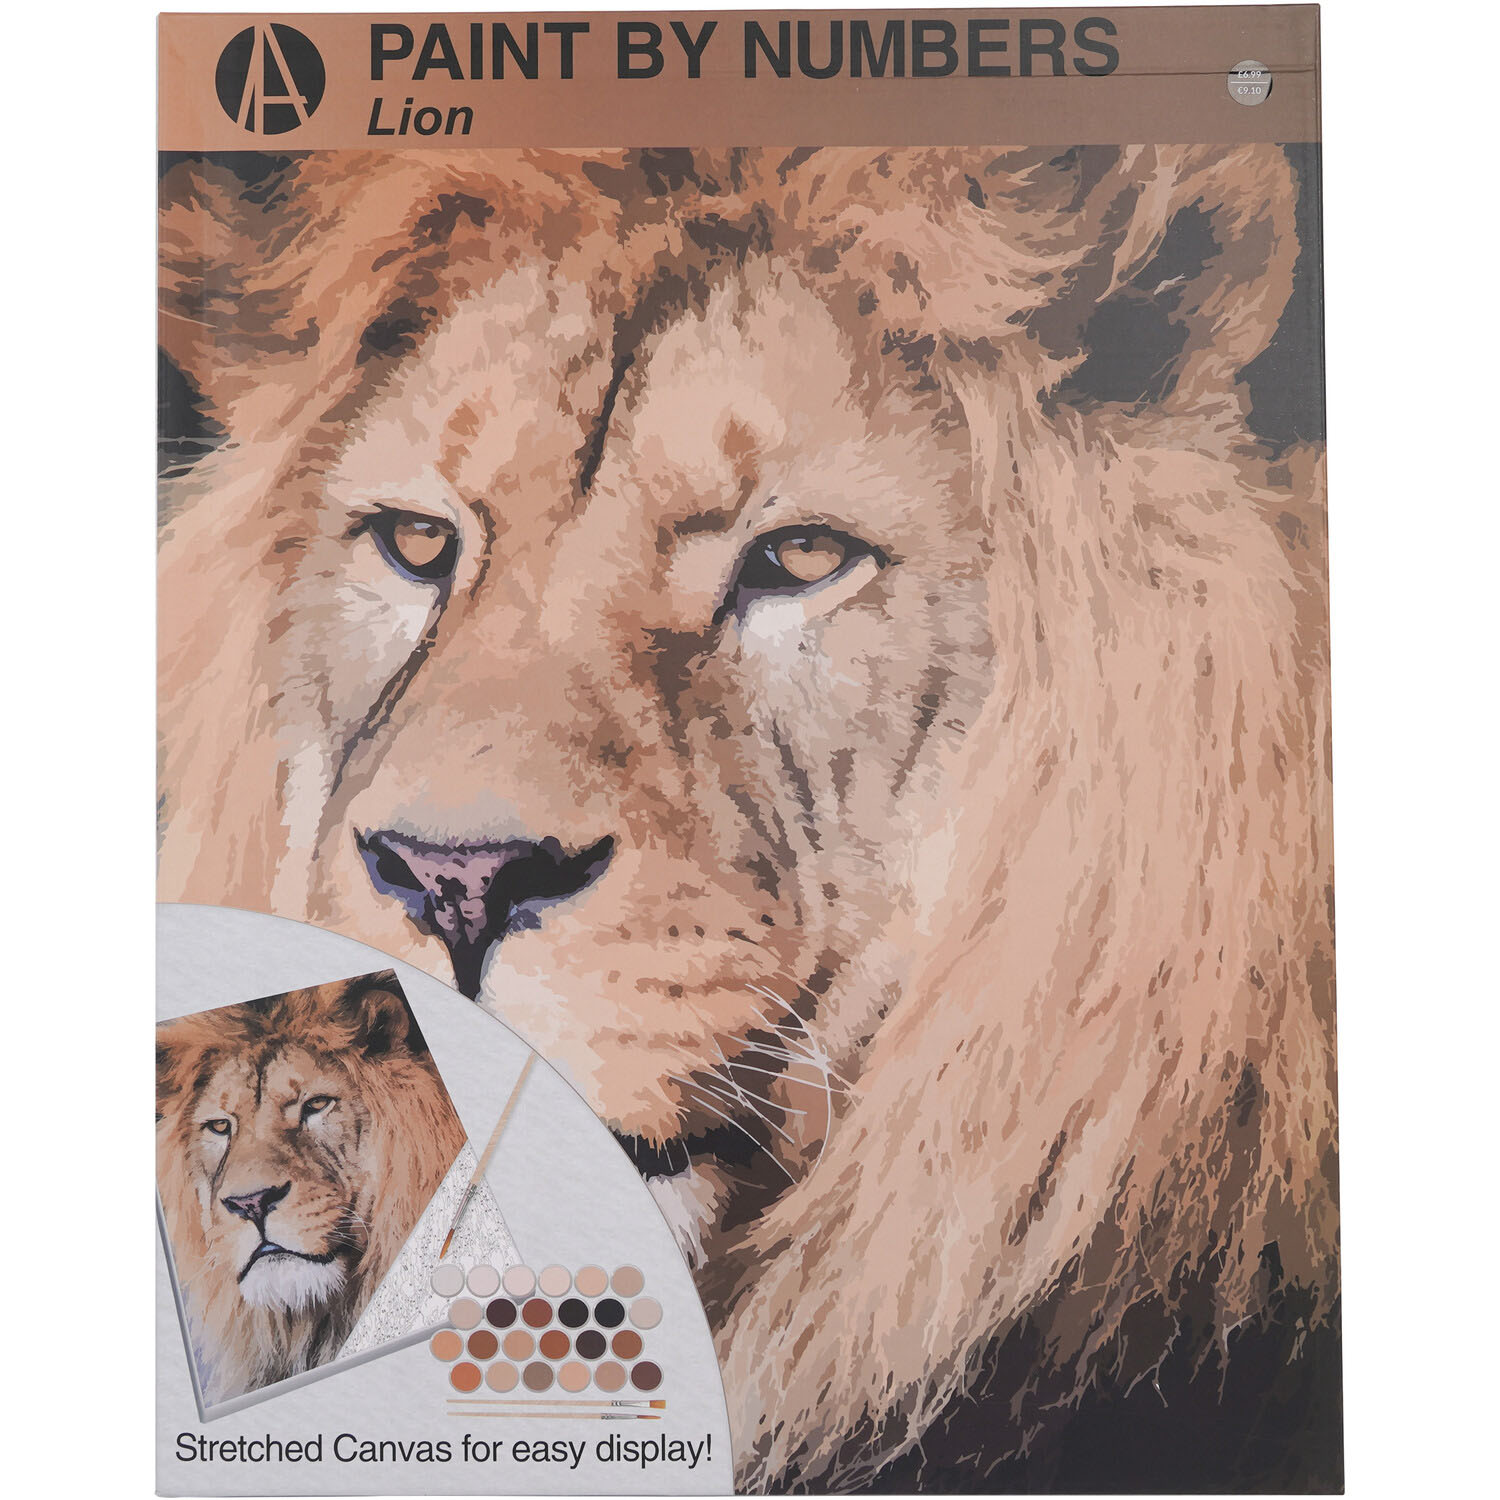 Paint by Numbers Lion or White Tiger Image 4